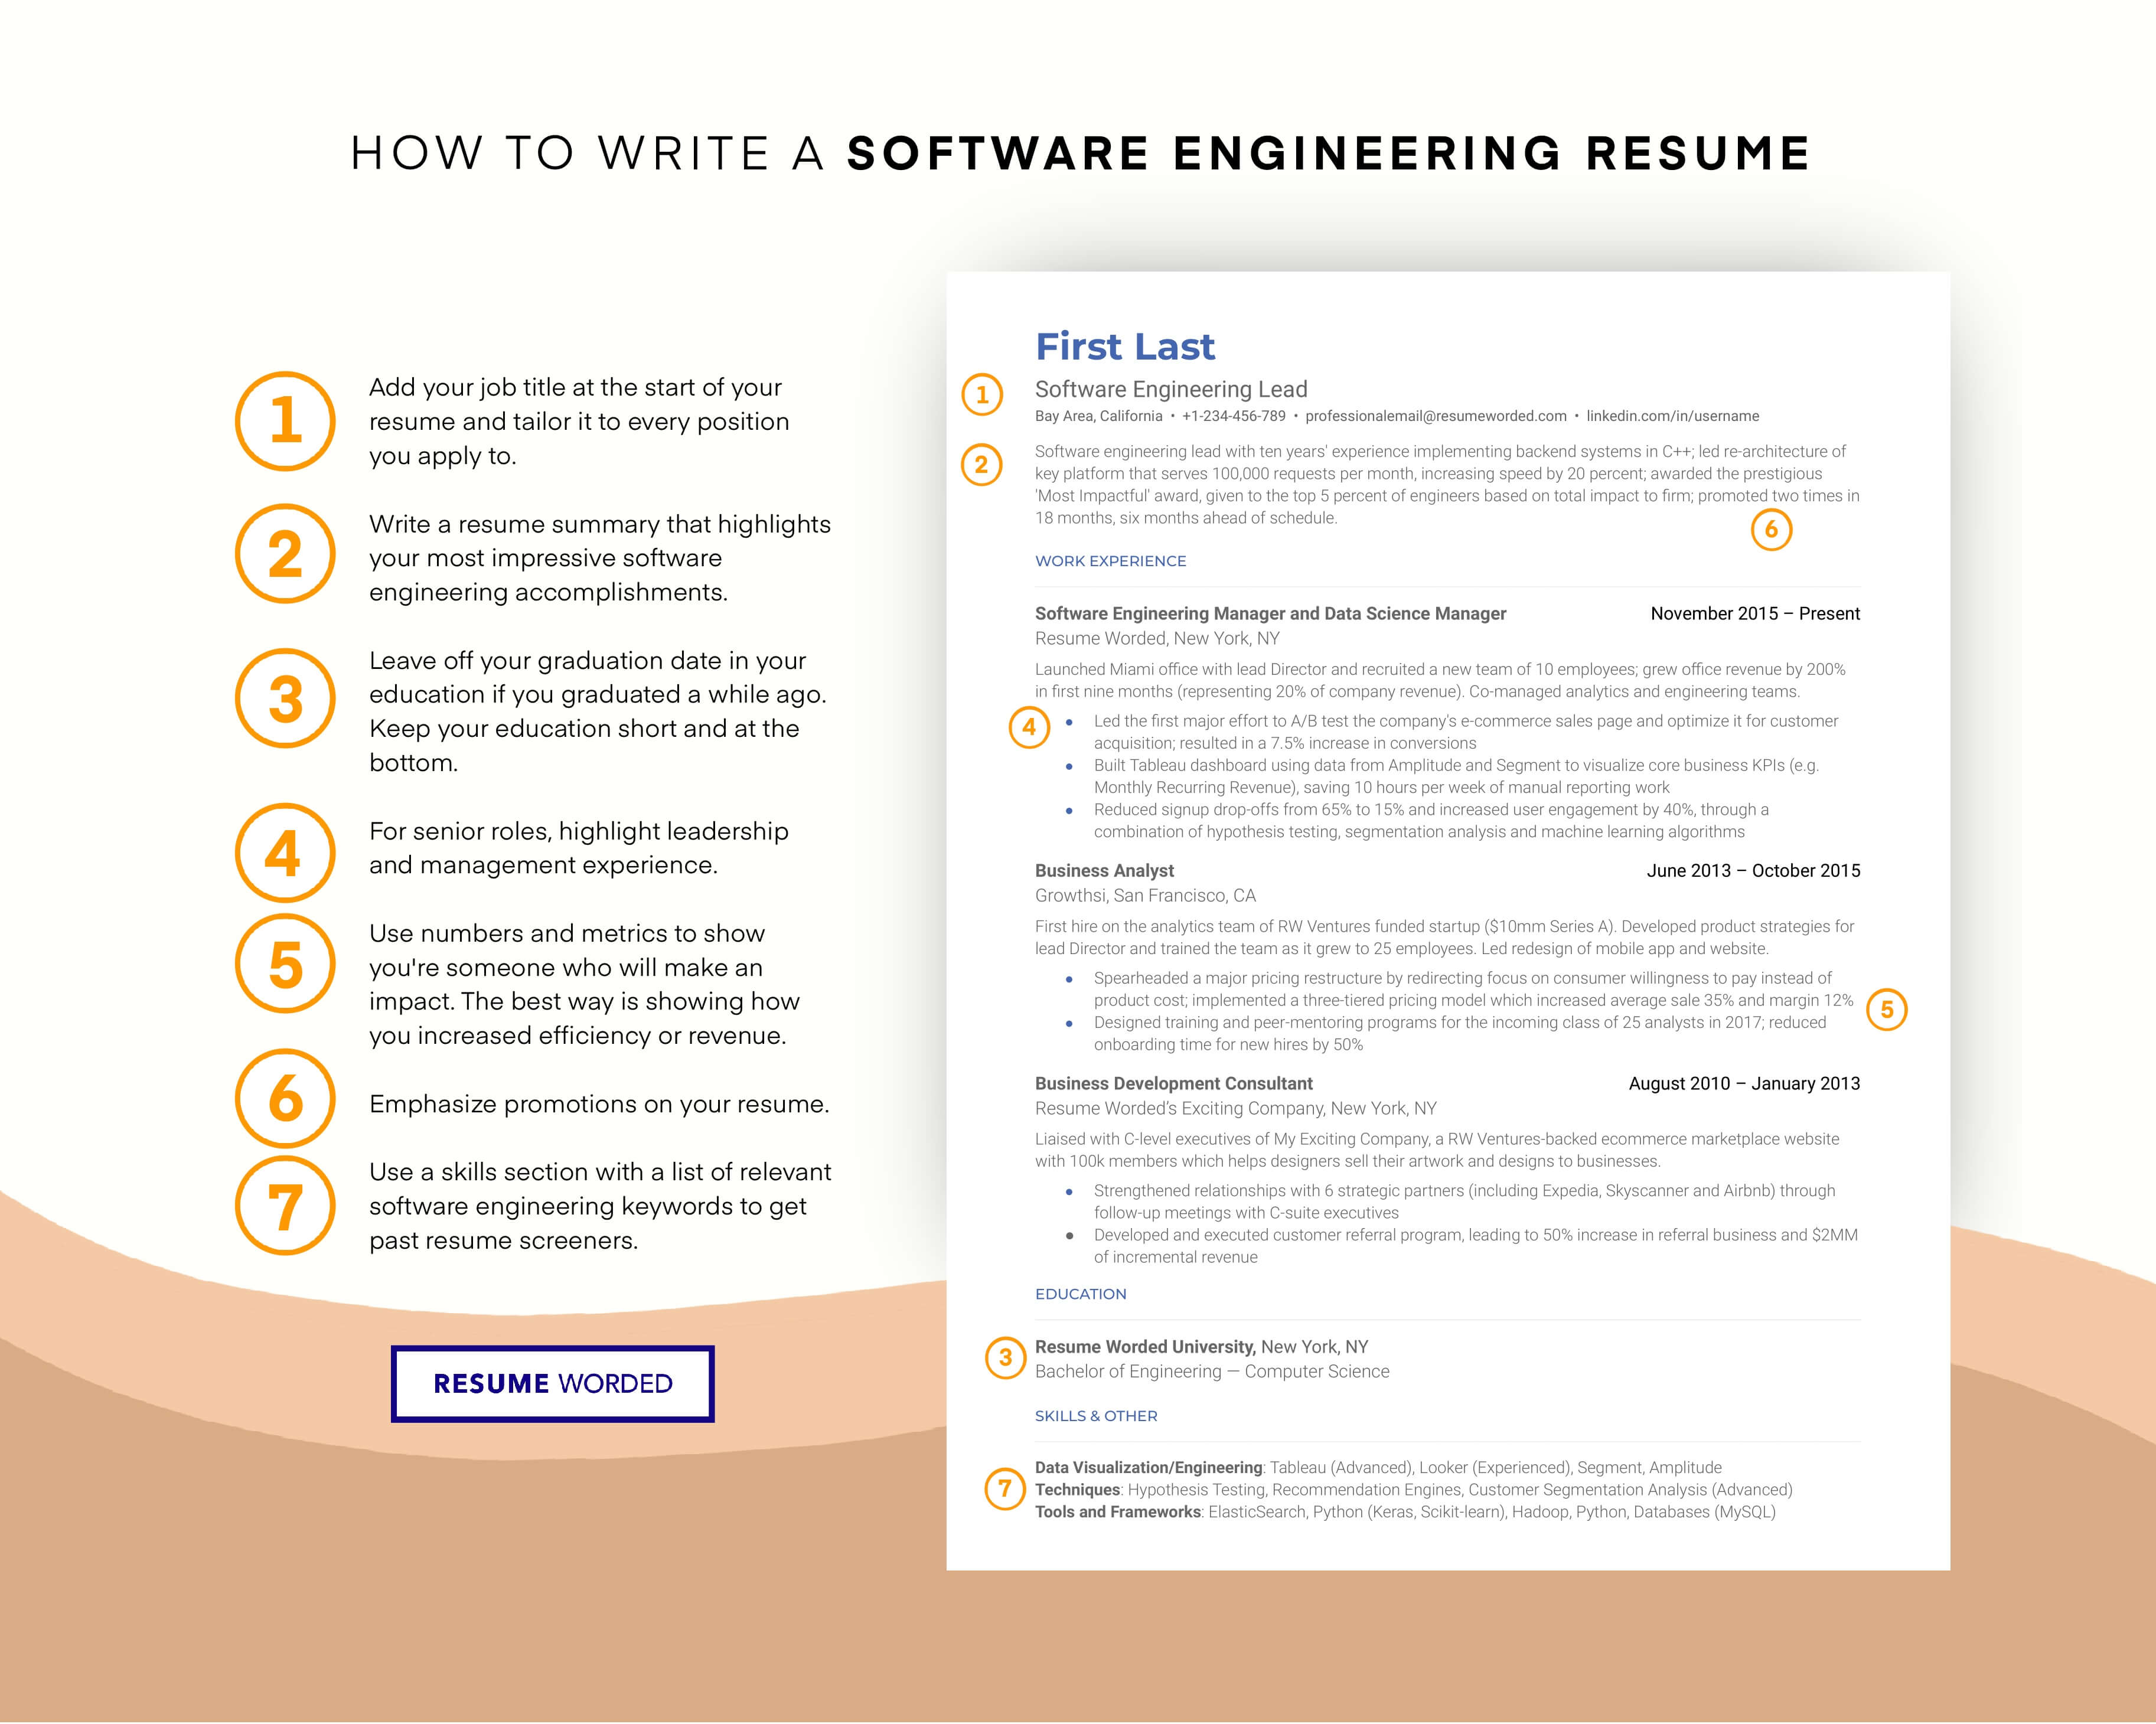 Showcase your software proficiency - Project Lead CV